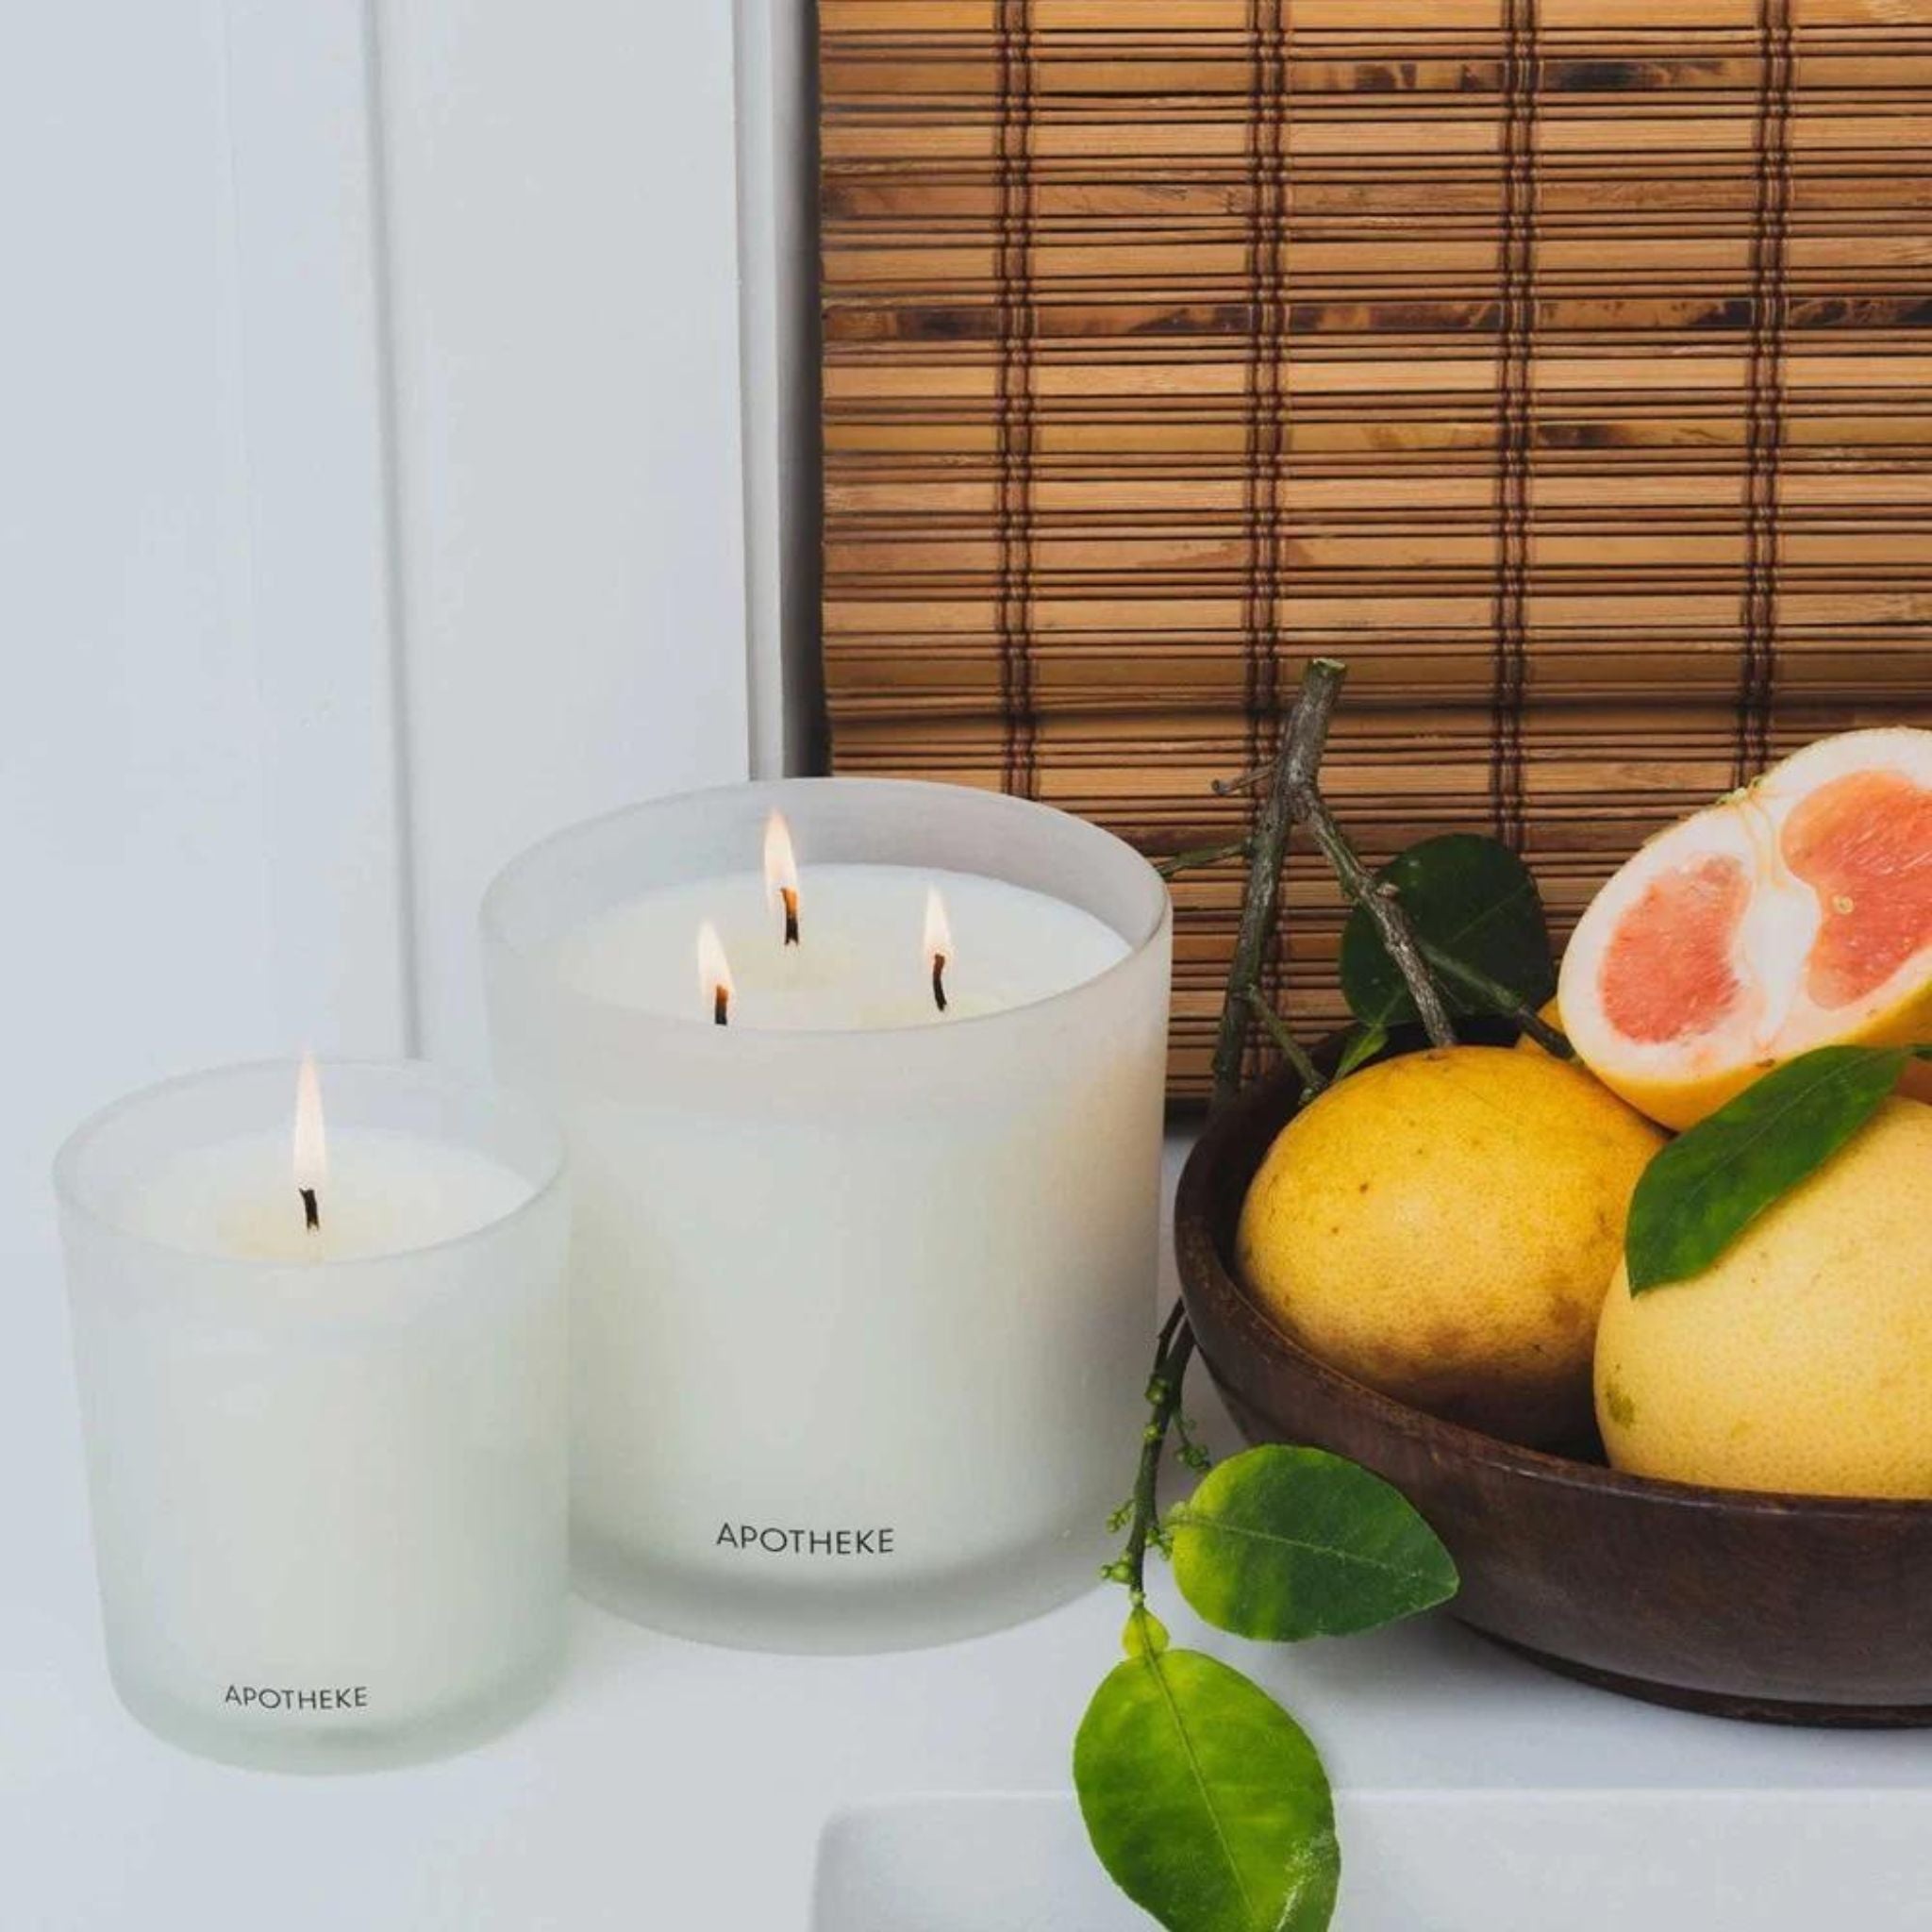 Simply Elevated - Signature Store Scent - Our Sea Salt Grapefruit Candle is the smell of summer time. Notes of juicy ripe grapefruit and black pepper intertwined with sea salt blend together for a bright, energizing scent. Balanced with dew drop accords and tarragon, 